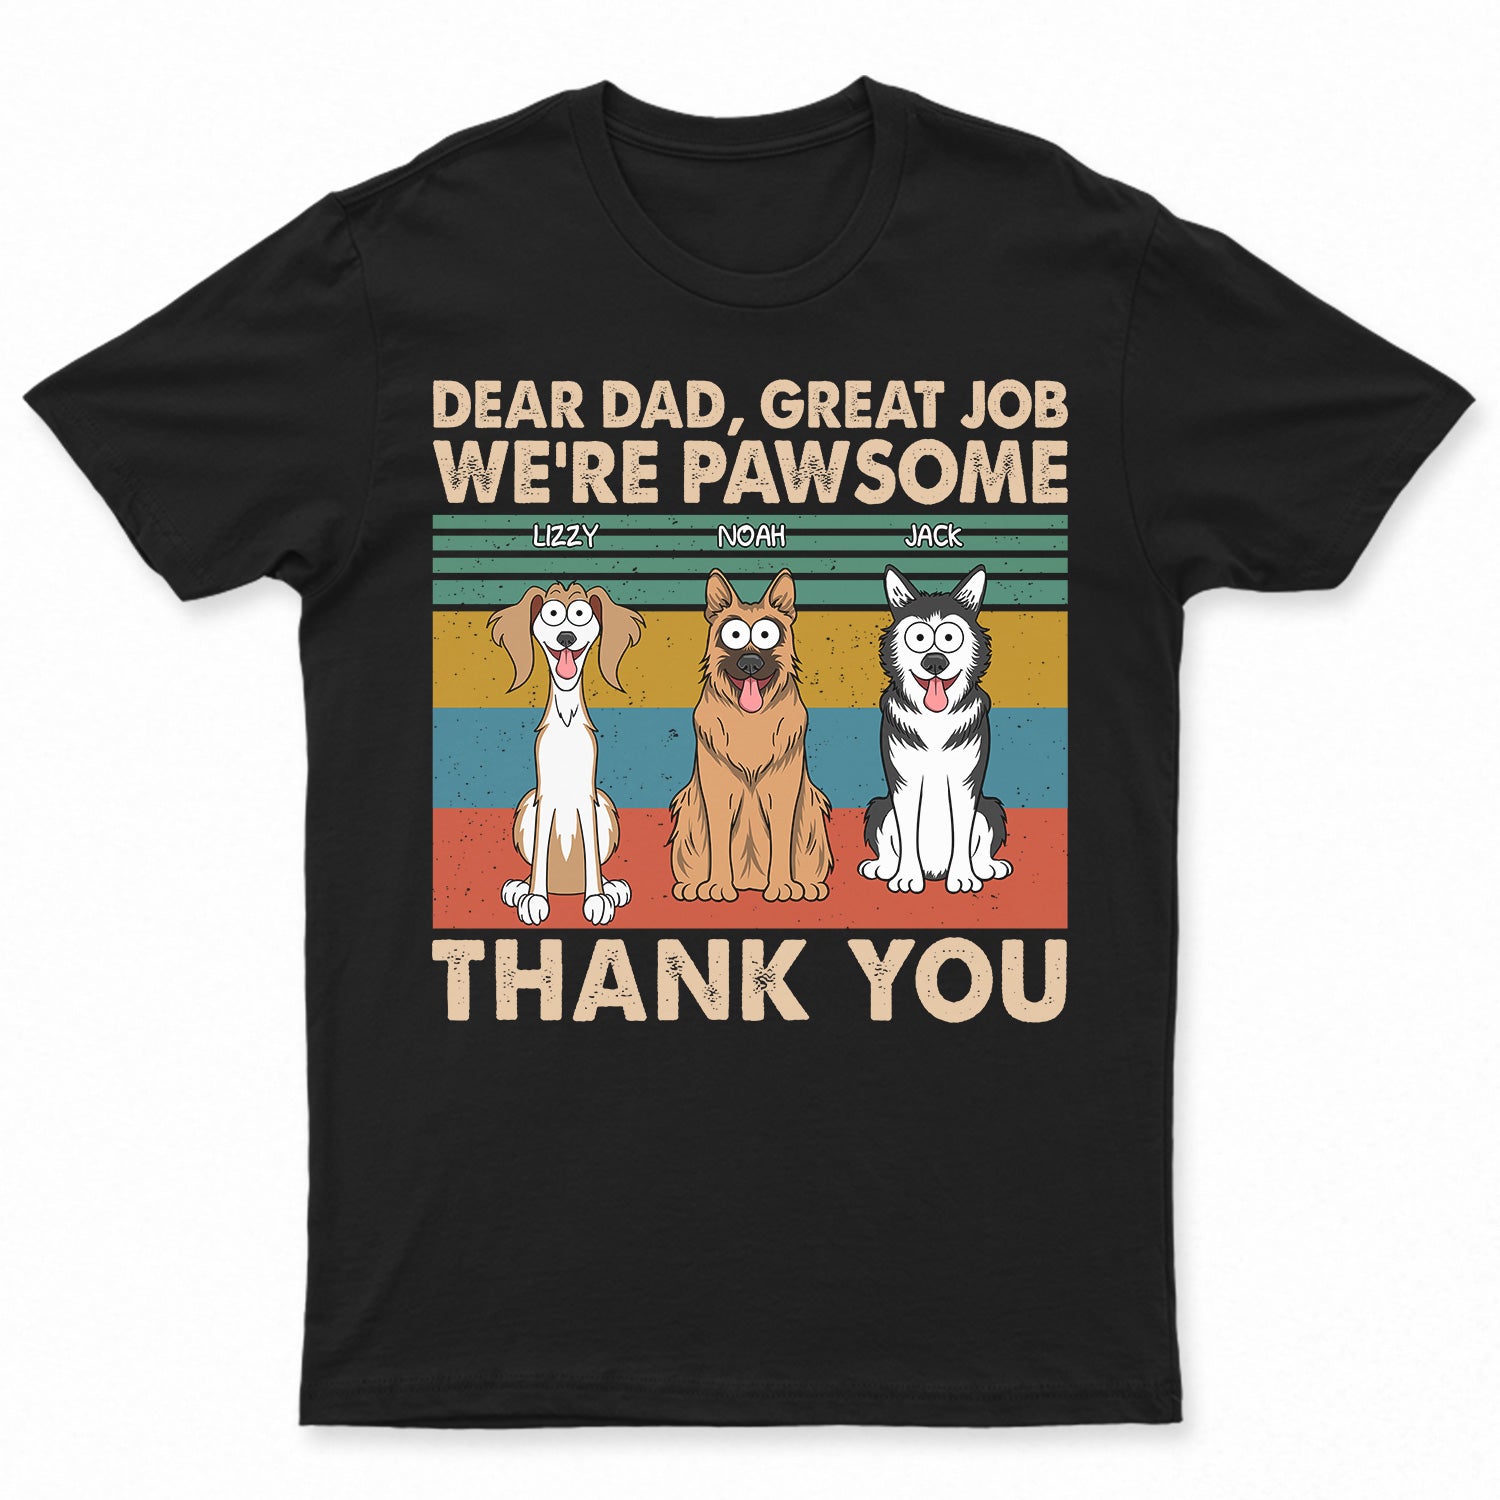 Dear Dad Great Job I'm Pawsome Thank You - Birthday, Anniversary, Funny Gift For Father, Dog Dad, Dog Lovers - Personalized T Shirt